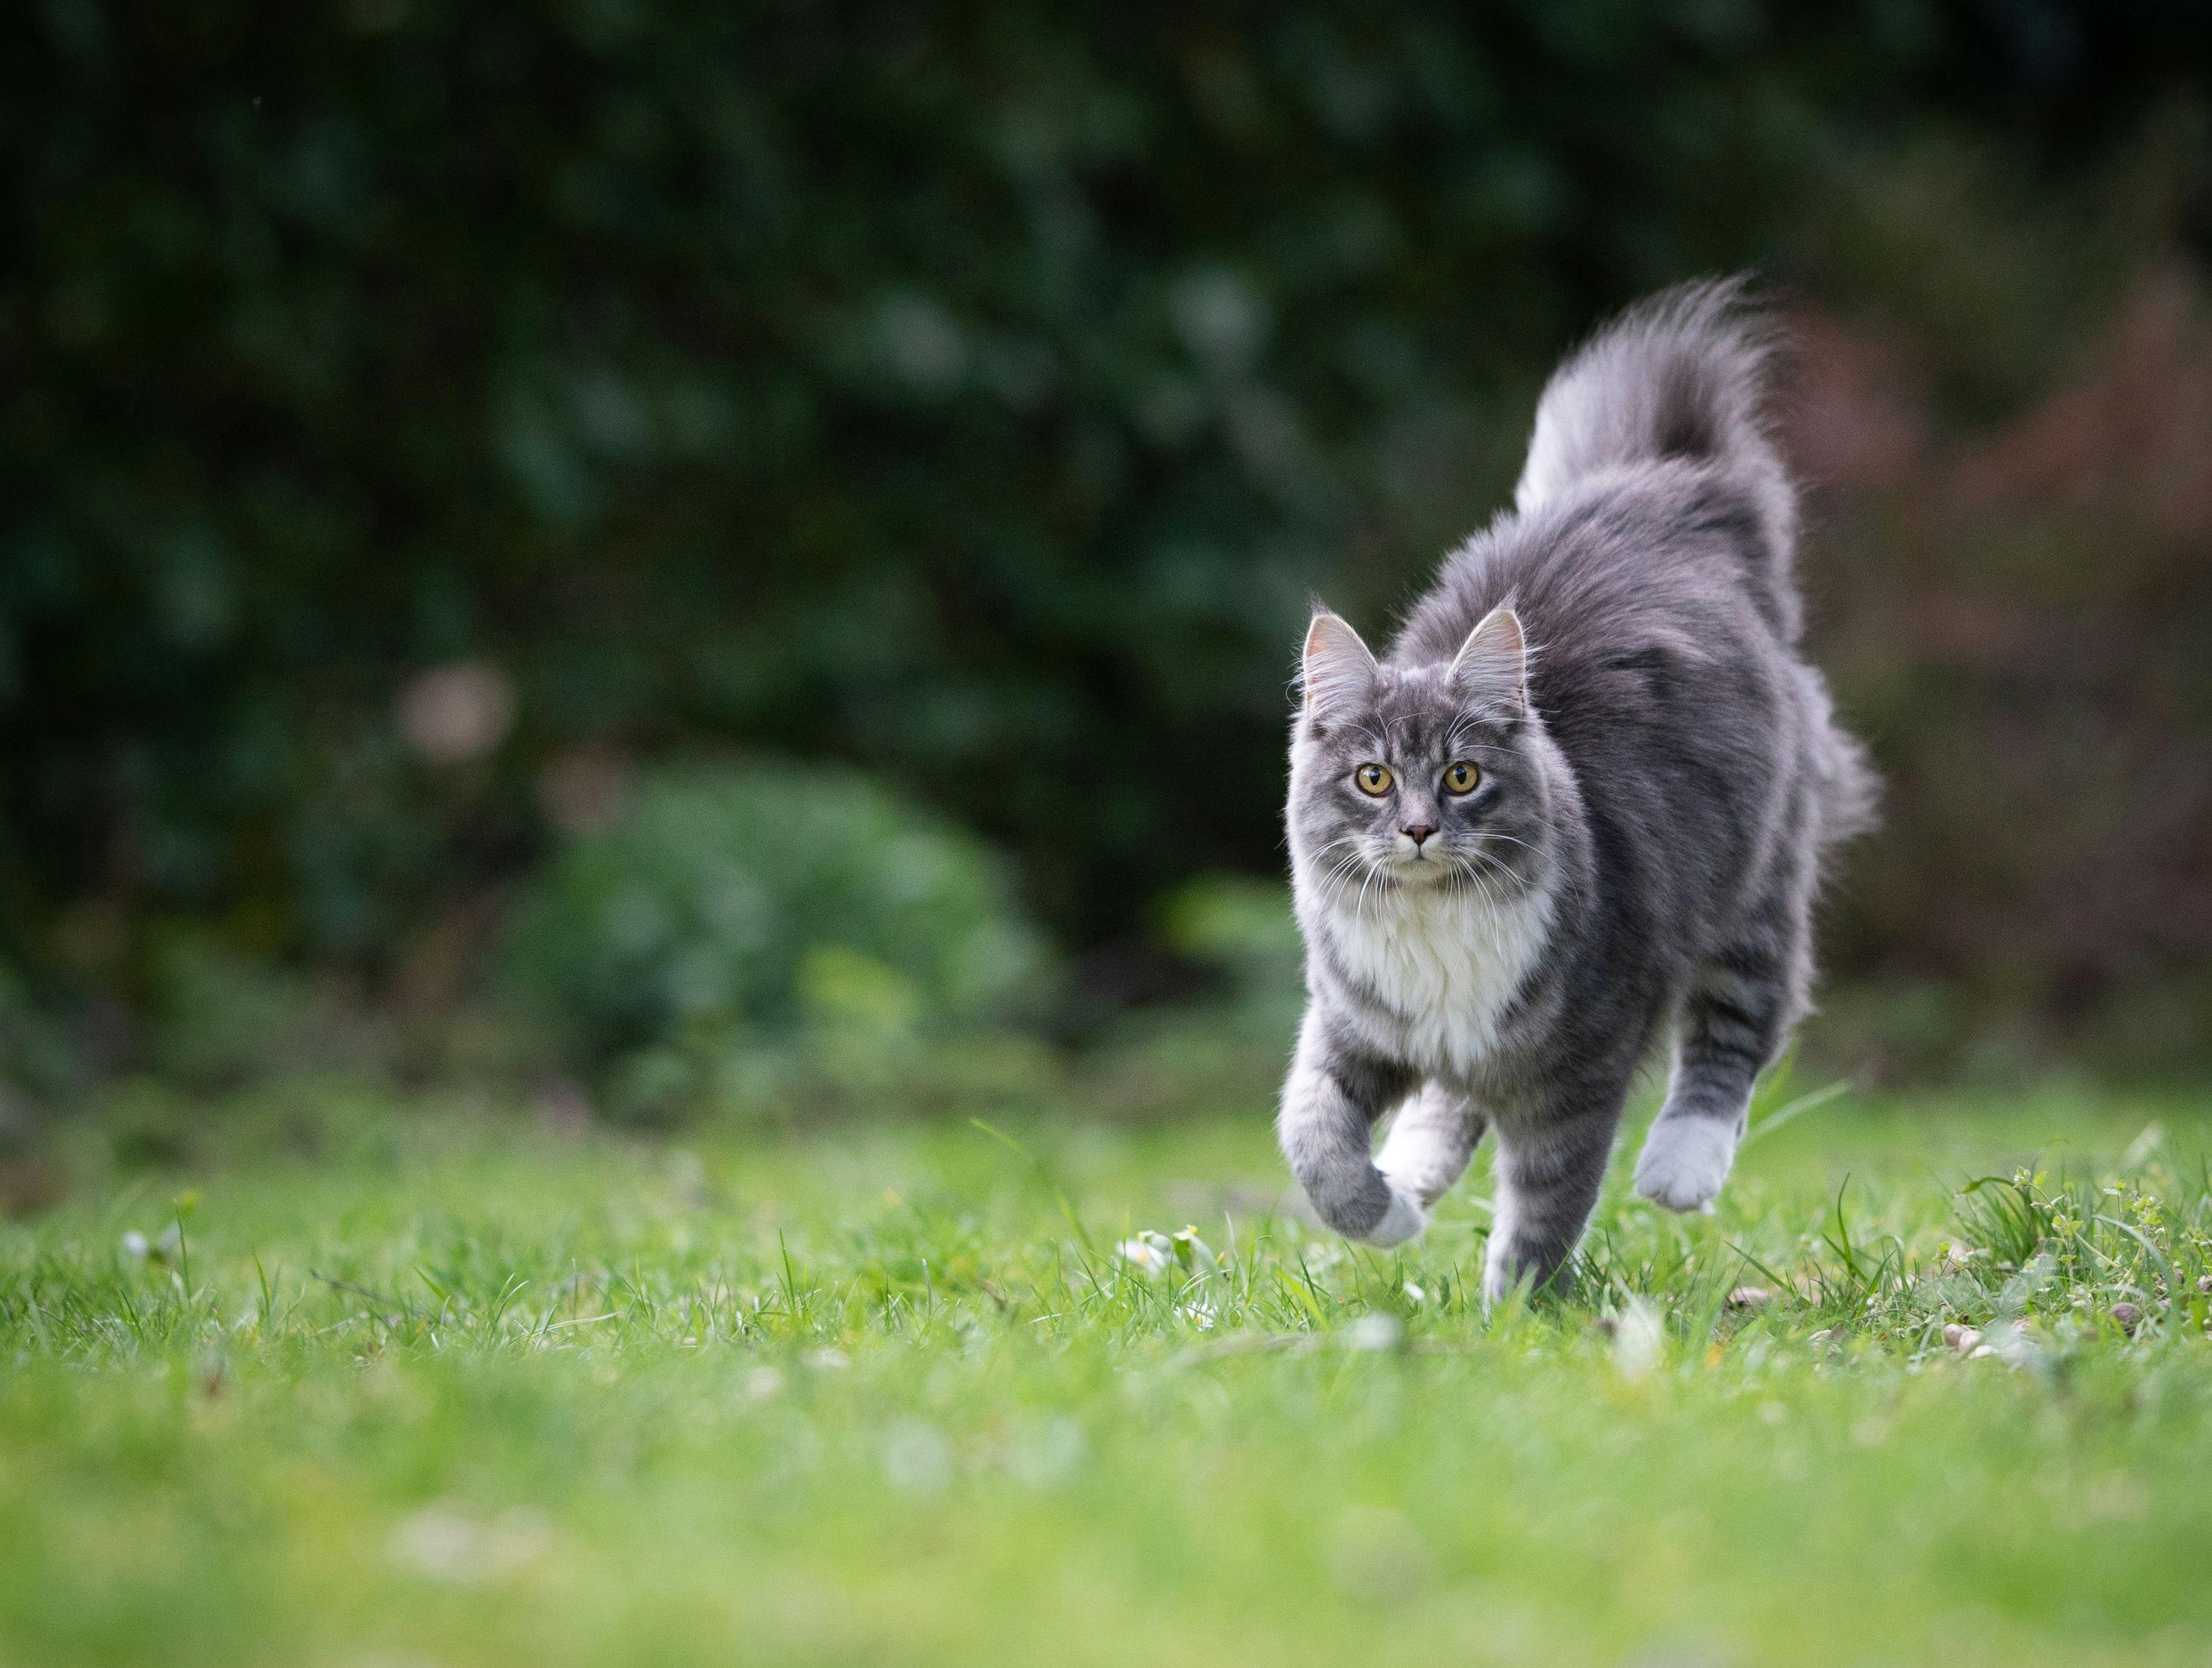 Demystifying the many myths about cats